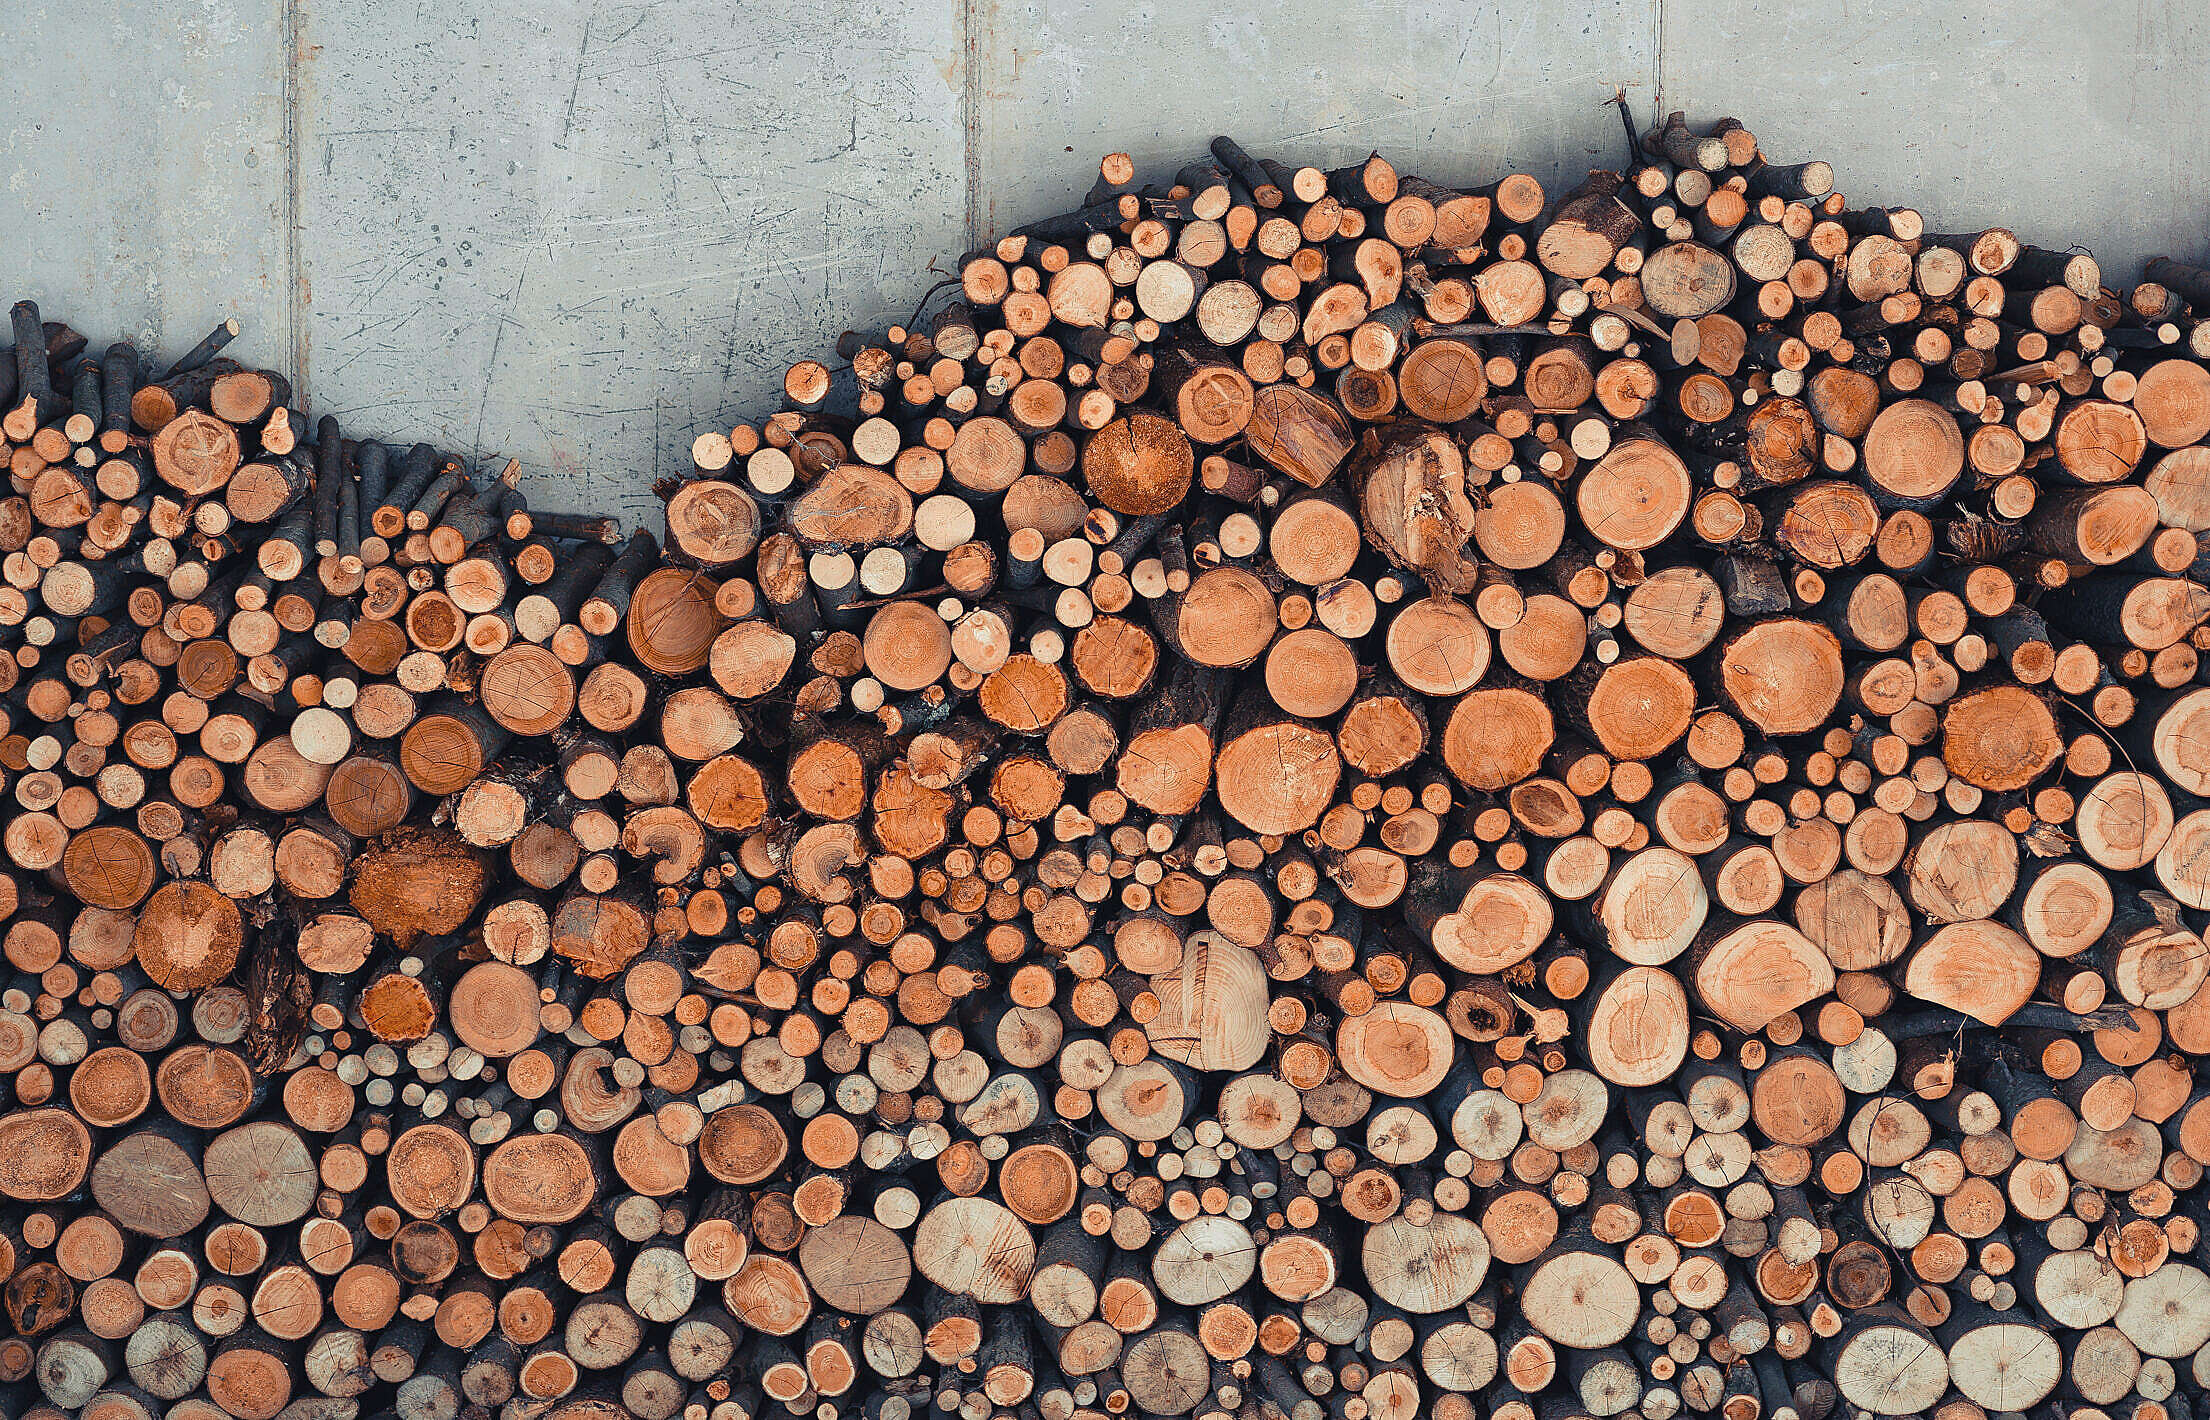 Pile of Fire Wood Ready for Cold Winter Free Stock Photo